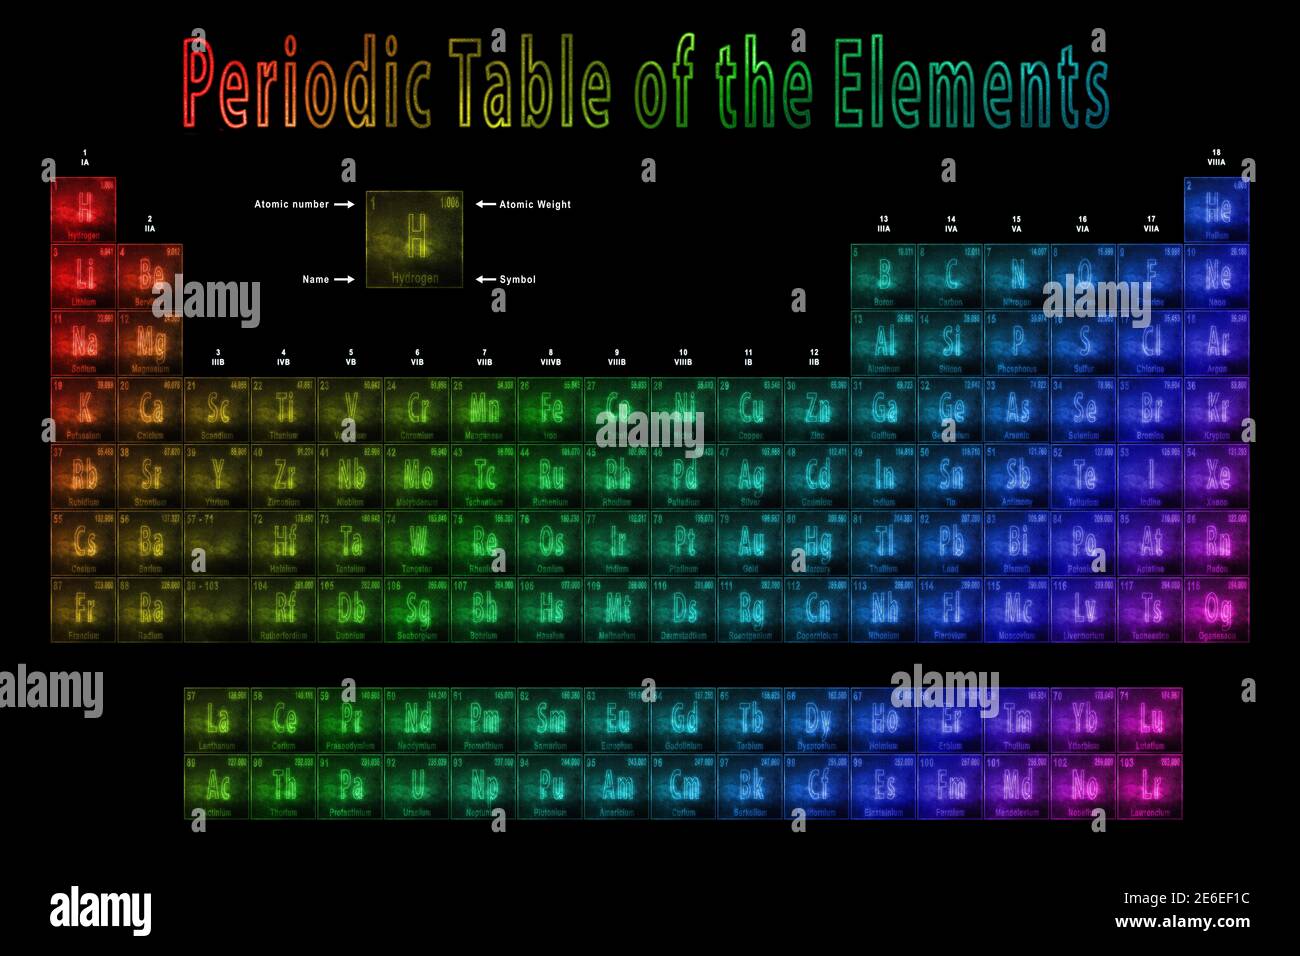 Periodic Table in Black and White Wallpaper - Periodic Table Wallpapers # periodic #tabl… | Periodic table, Periodic table of the elements, Black and  white wallpaper